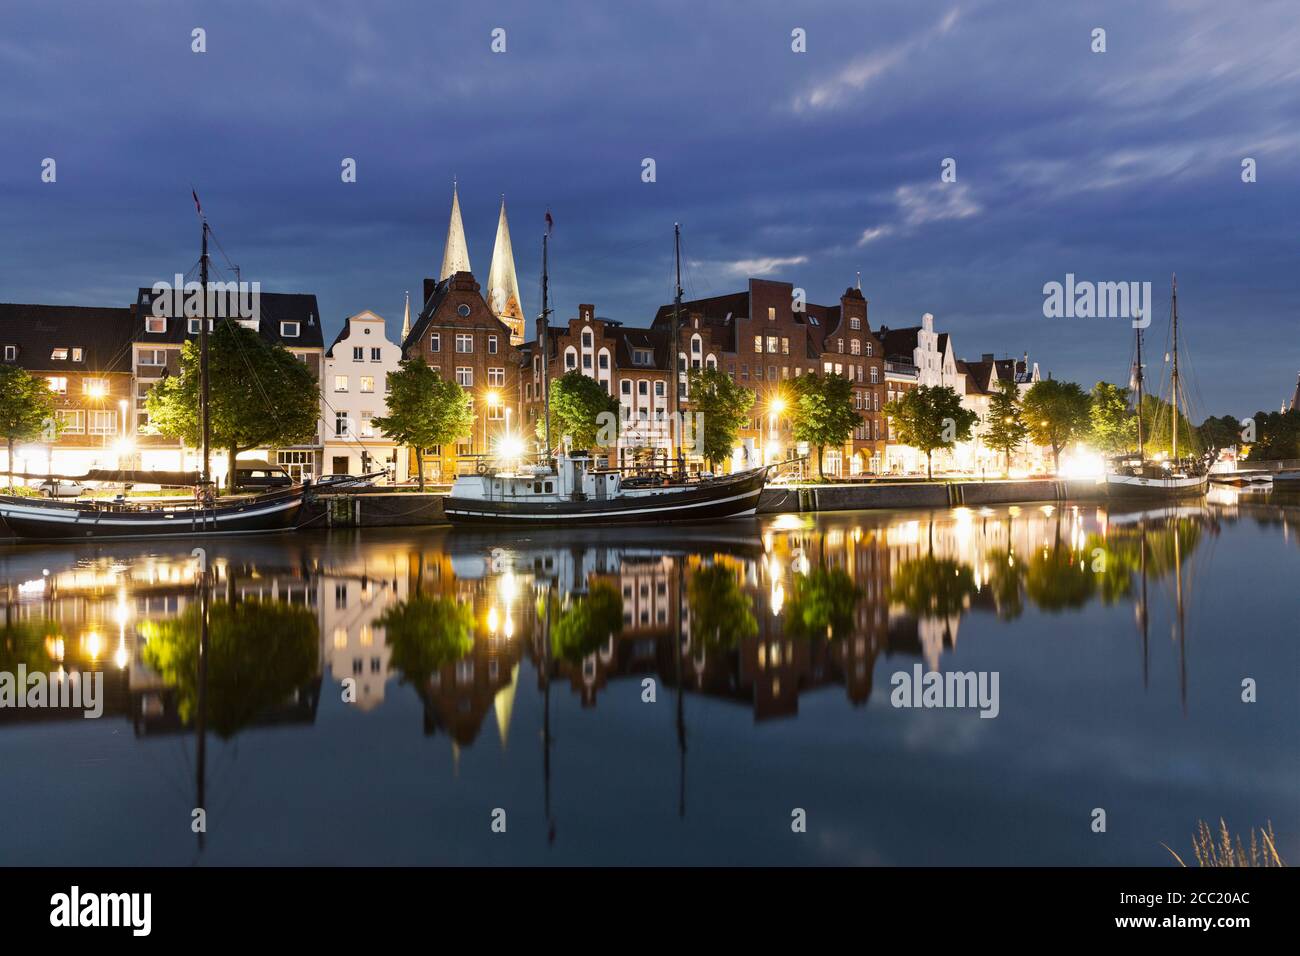 Germany, Schleswig Holstein, Lubeck, View of Harbour museum Stock Photo